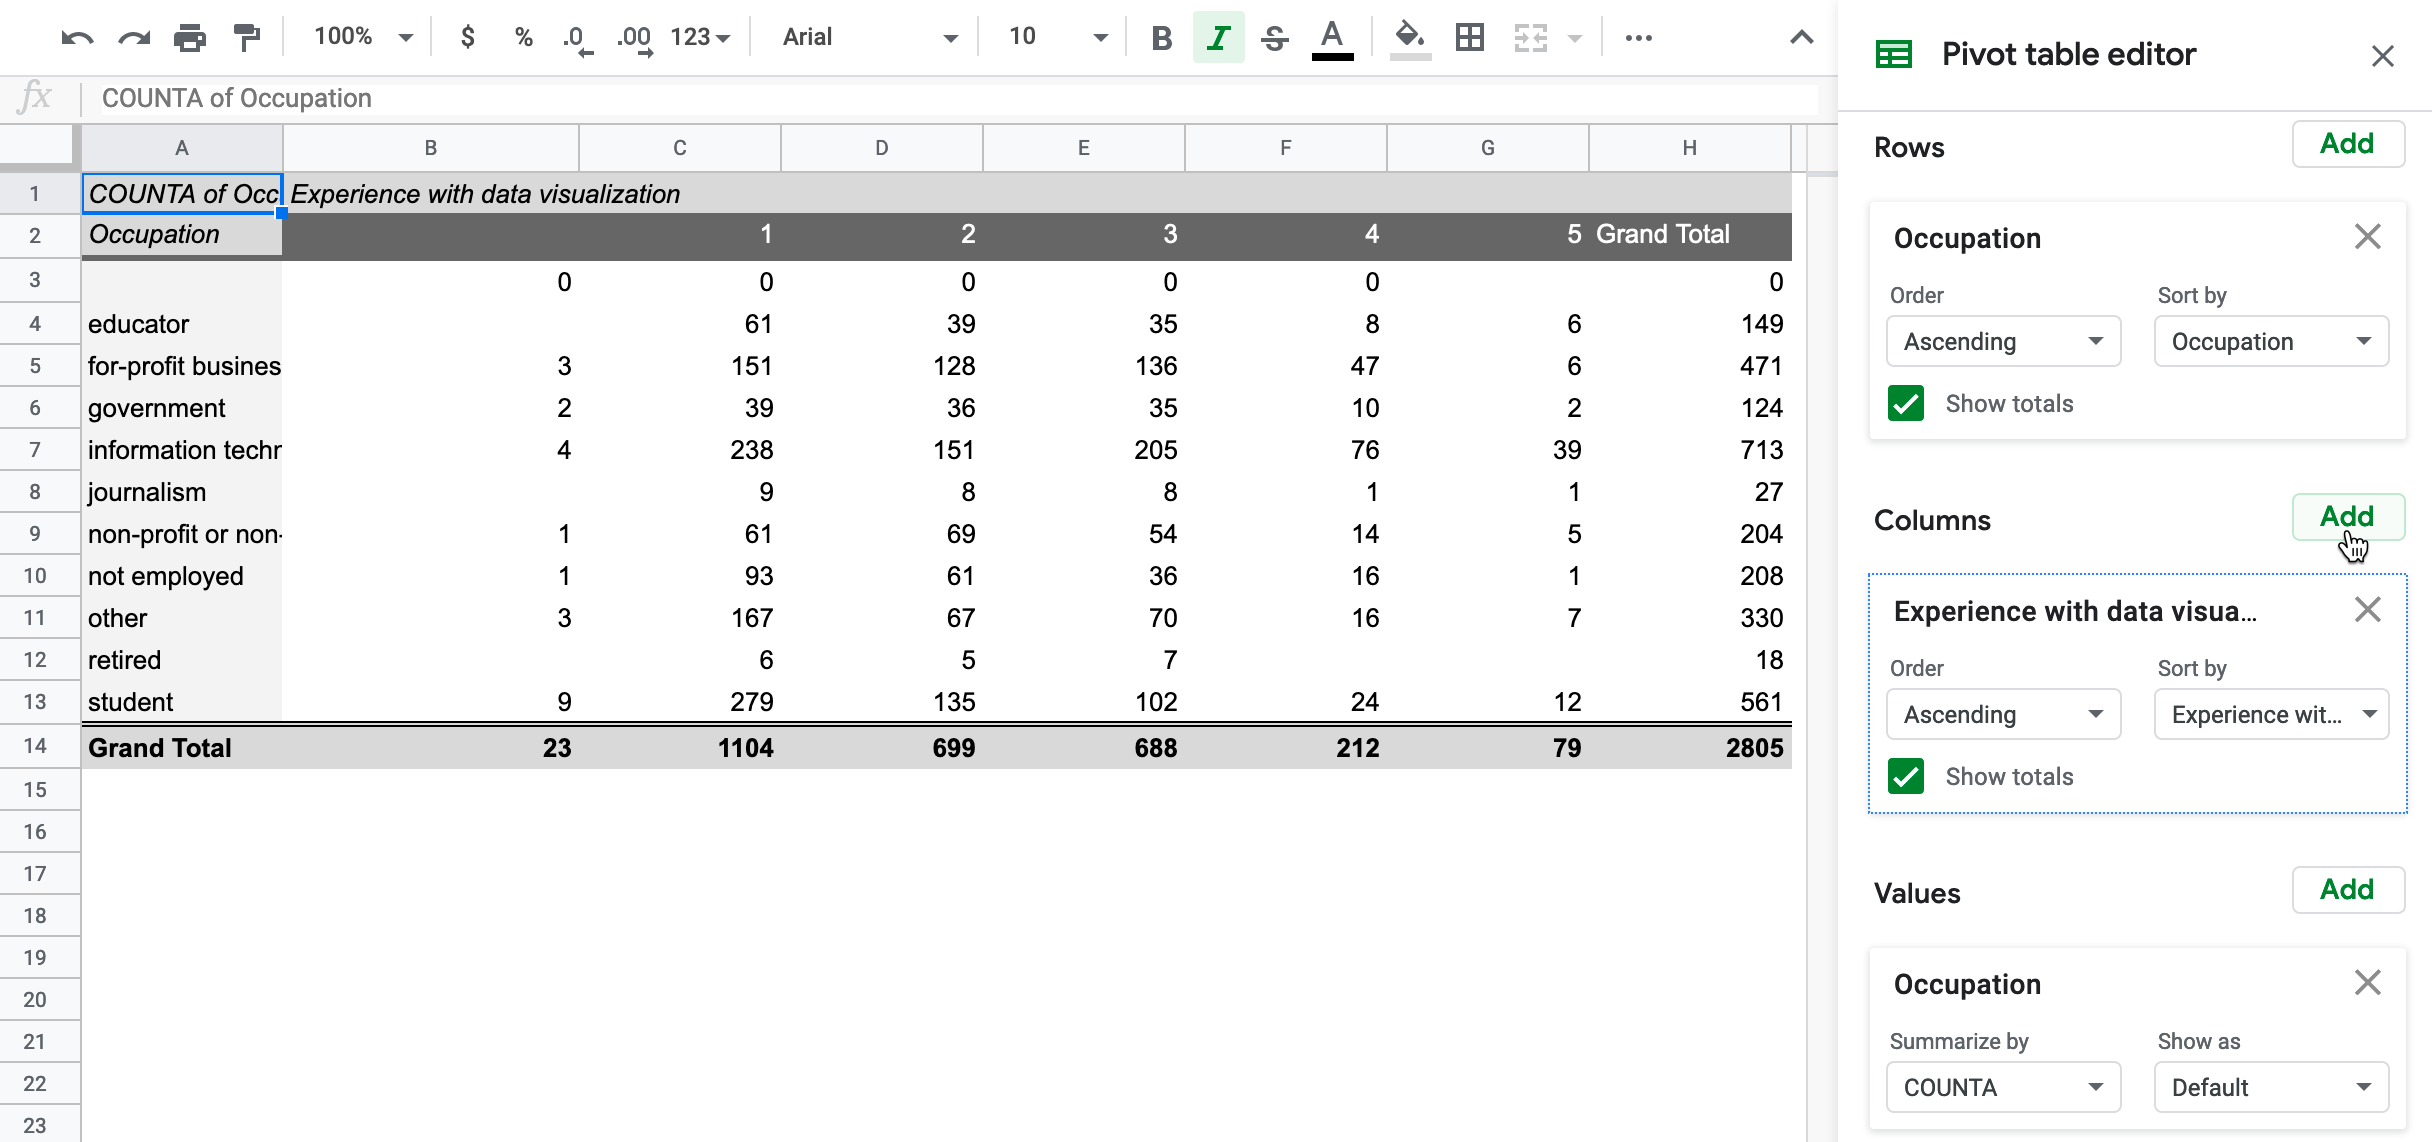 In the Pivot table editor, click the Columns Add button and select Experience with data visualization.